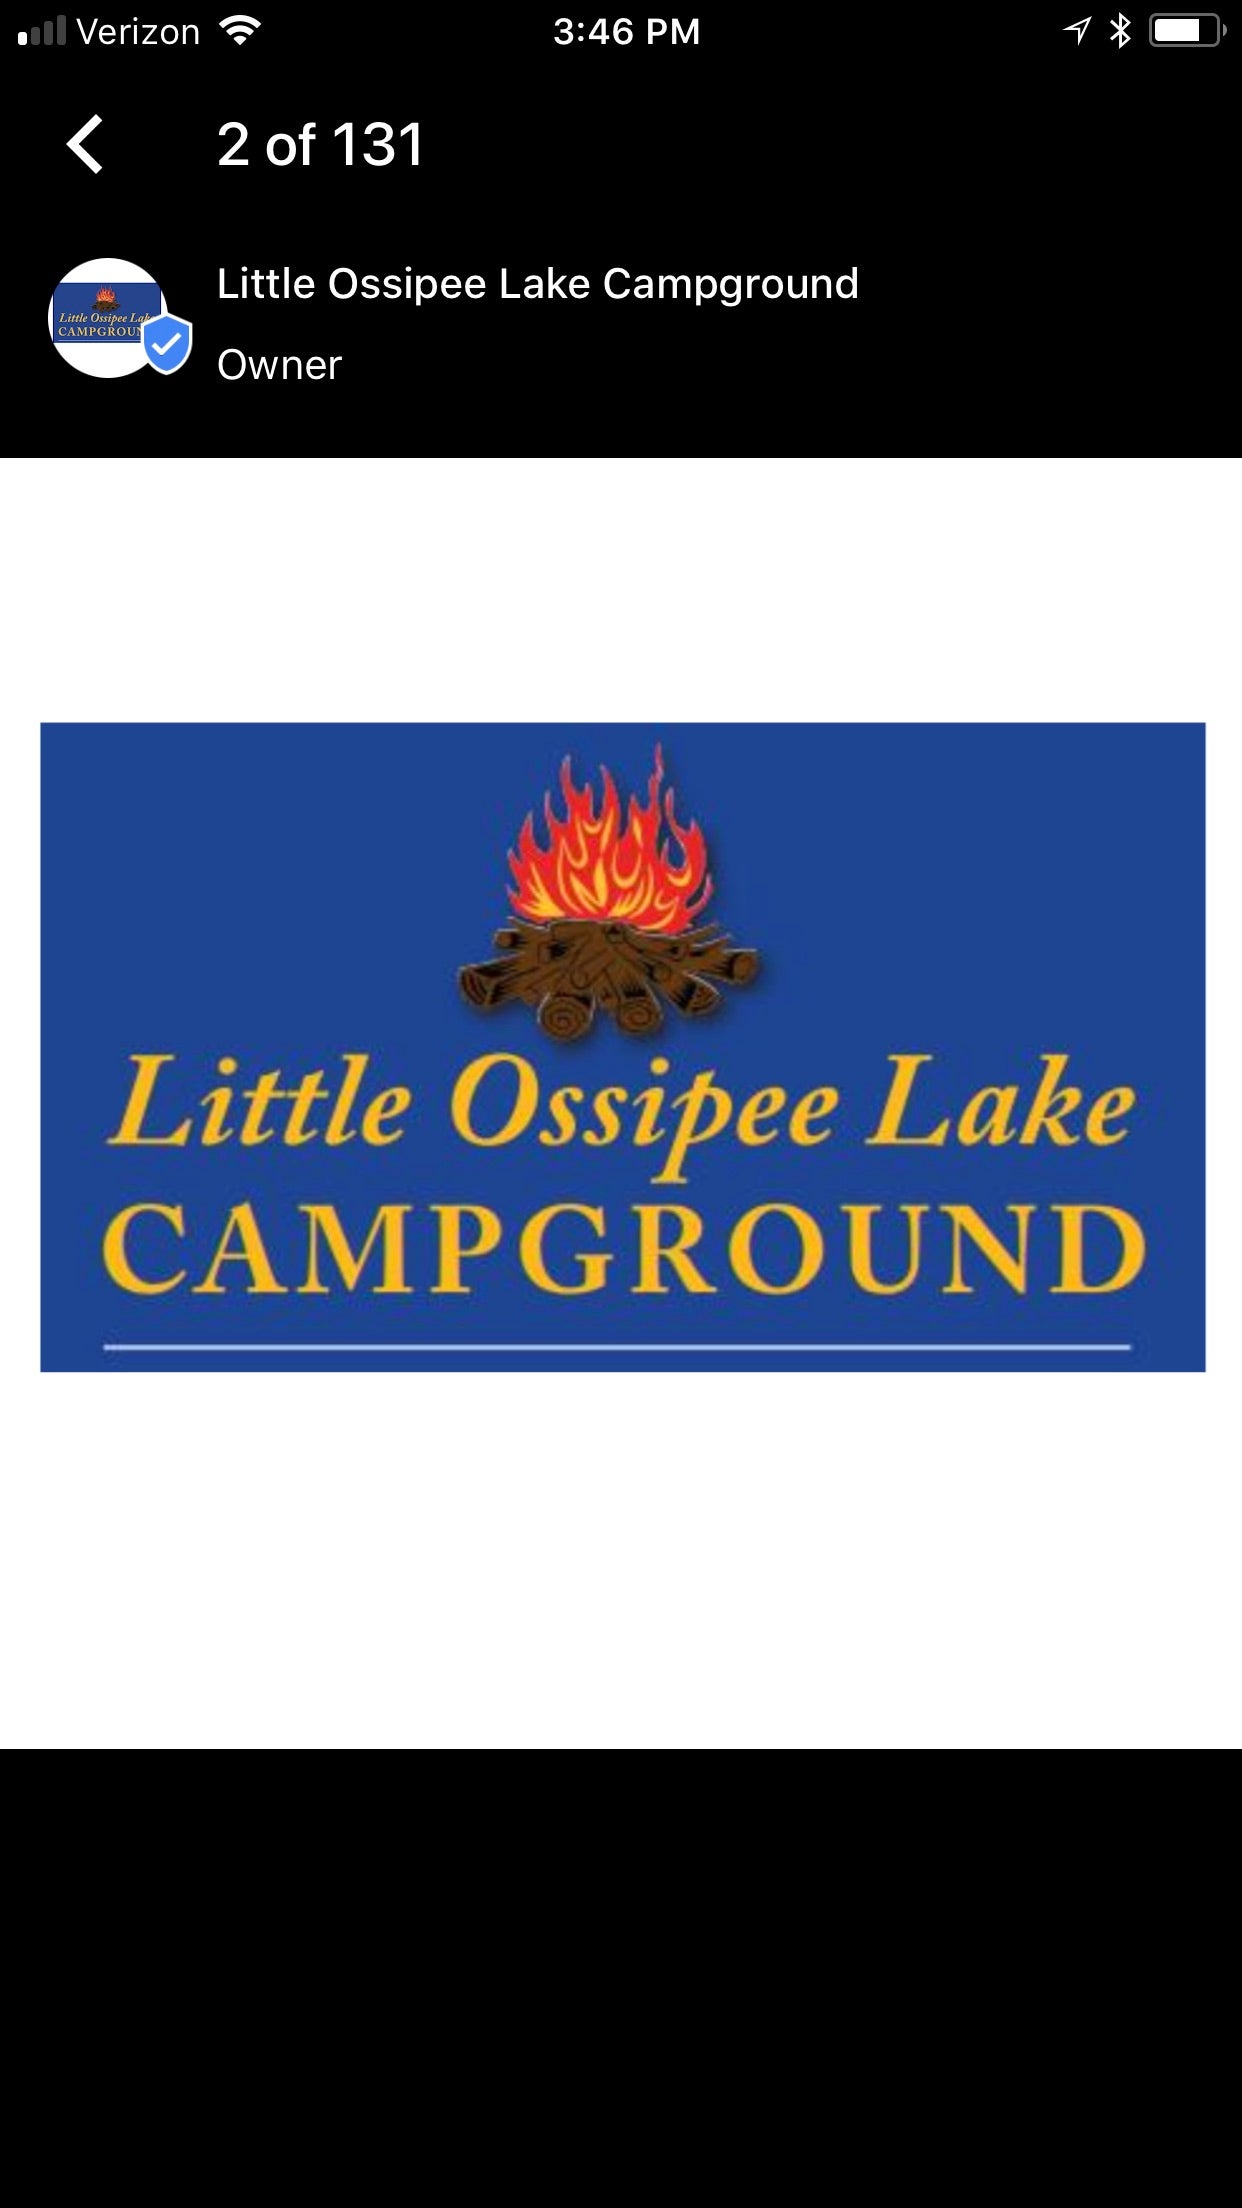 Camper submitted image from Little Ossipee Lake Campground - 1